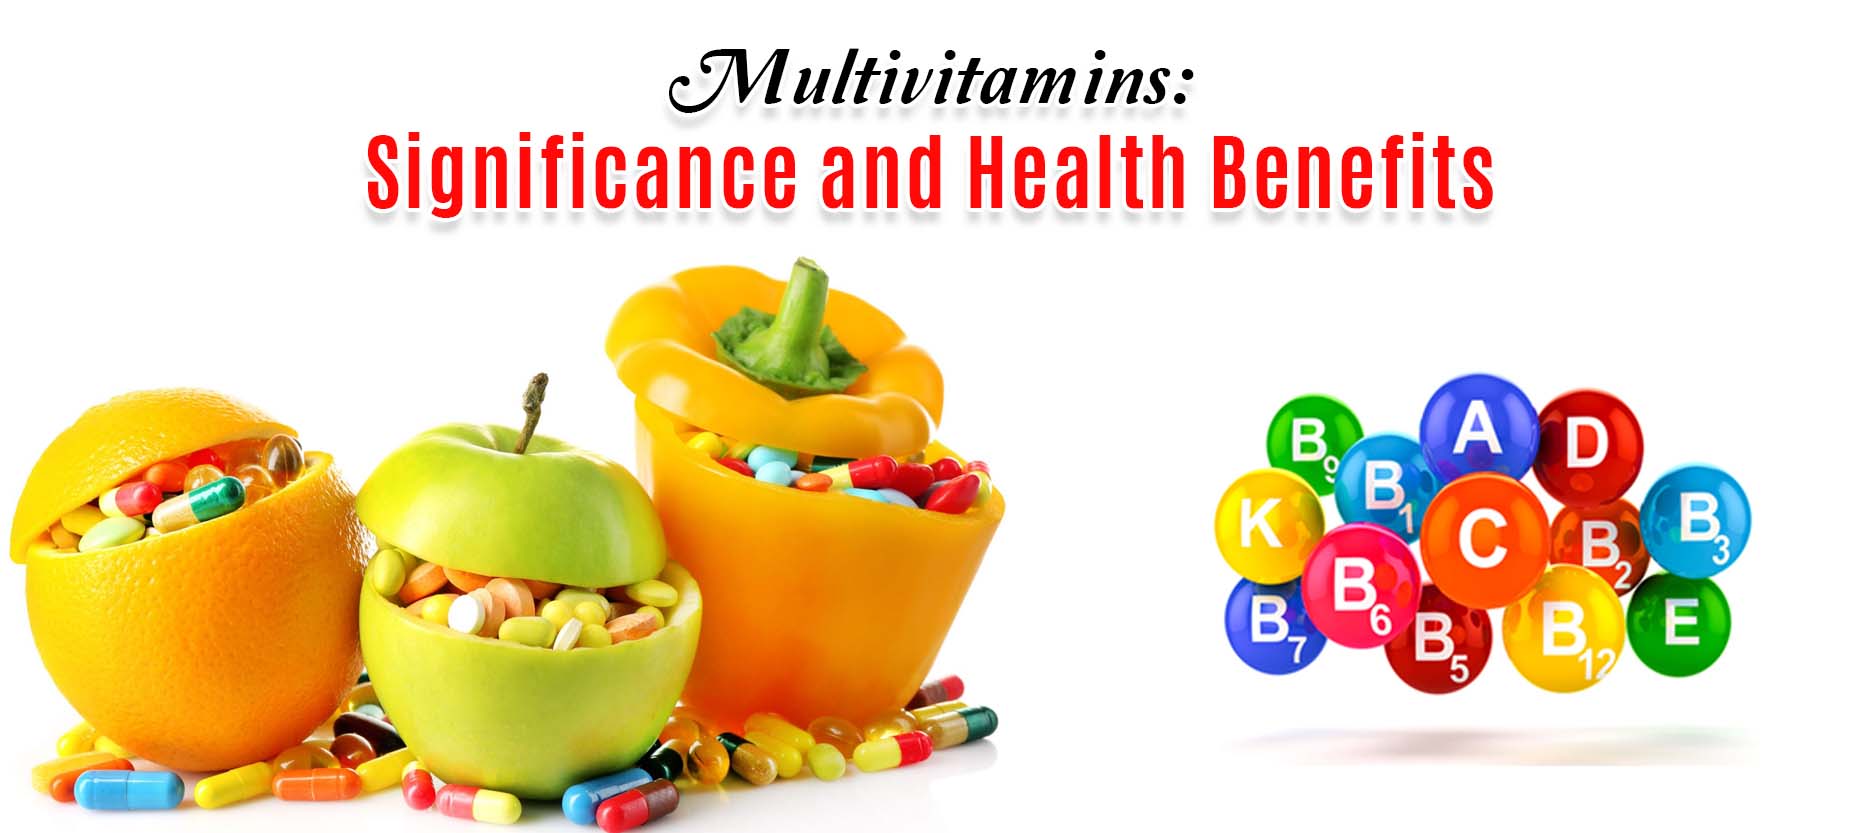 Multivitamins: Significance and Health Benefits